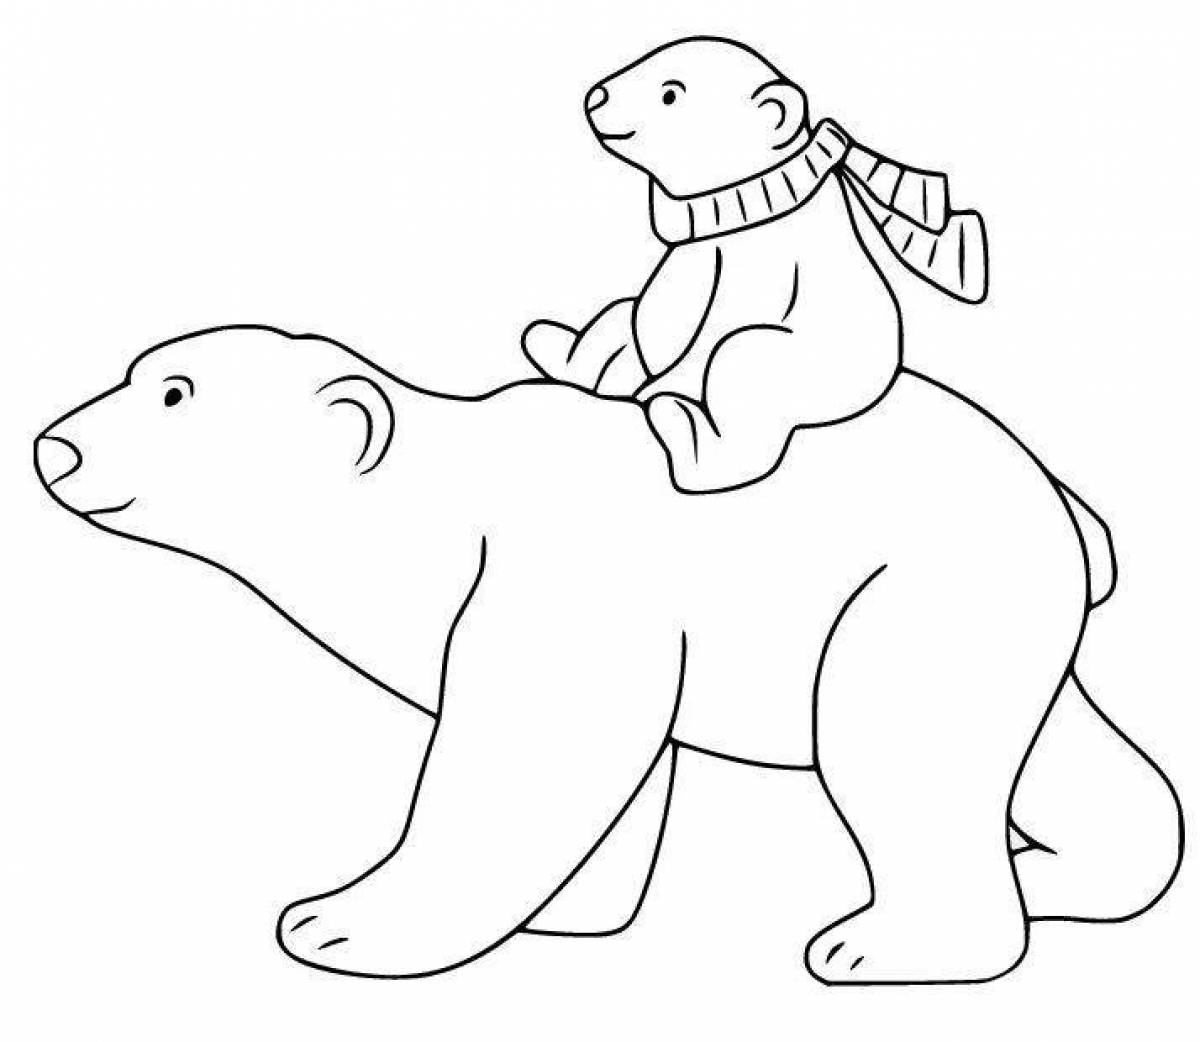 Coloring for a comfortable white teddy bear